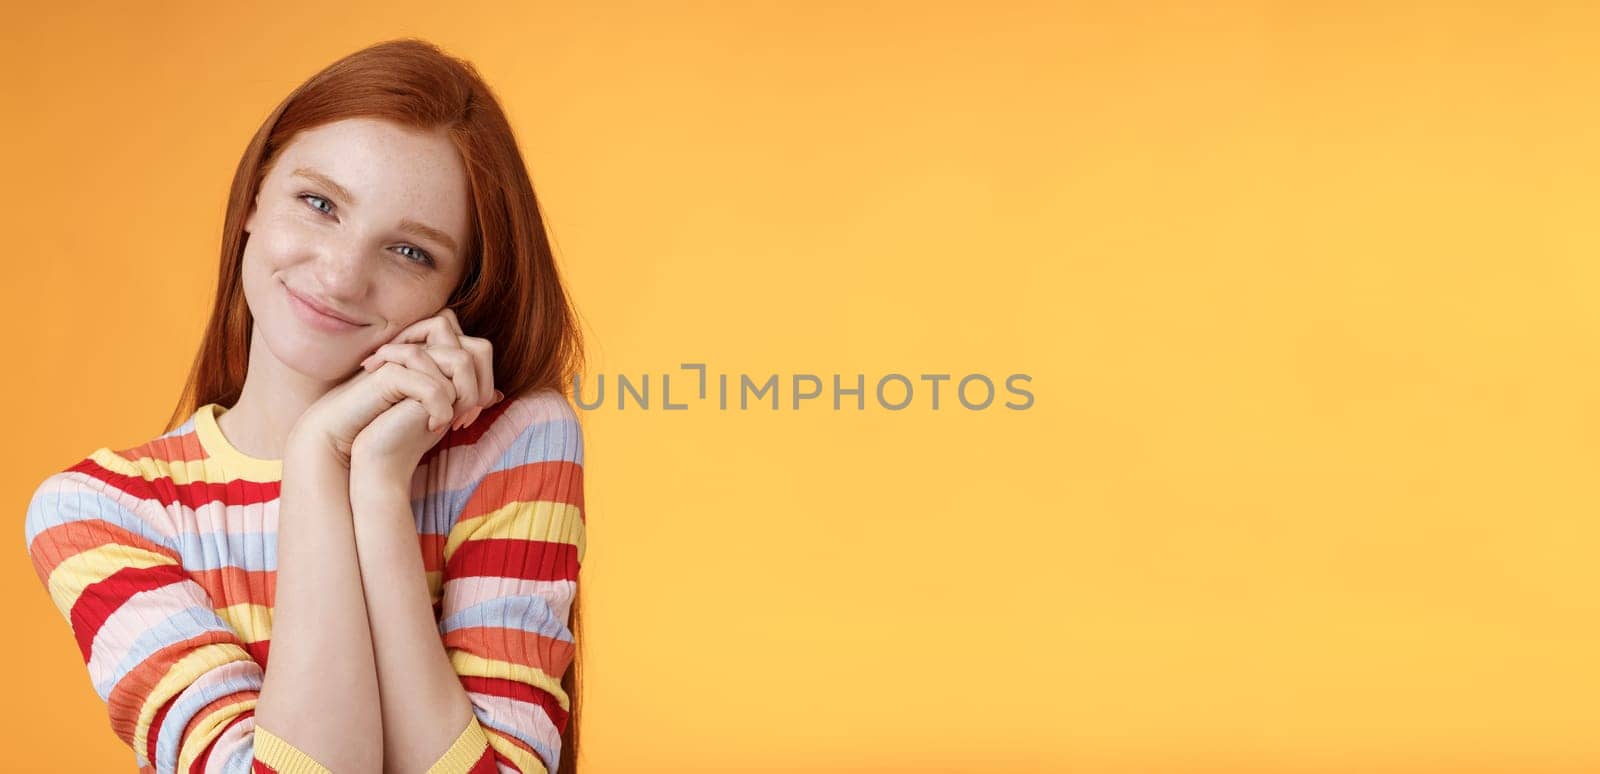 Sweet silly tender redhead young girl leaning palms touched smiling receive charming lovely gift standing thankful look affection sympathy accept dearest romantic gesture, orange background.